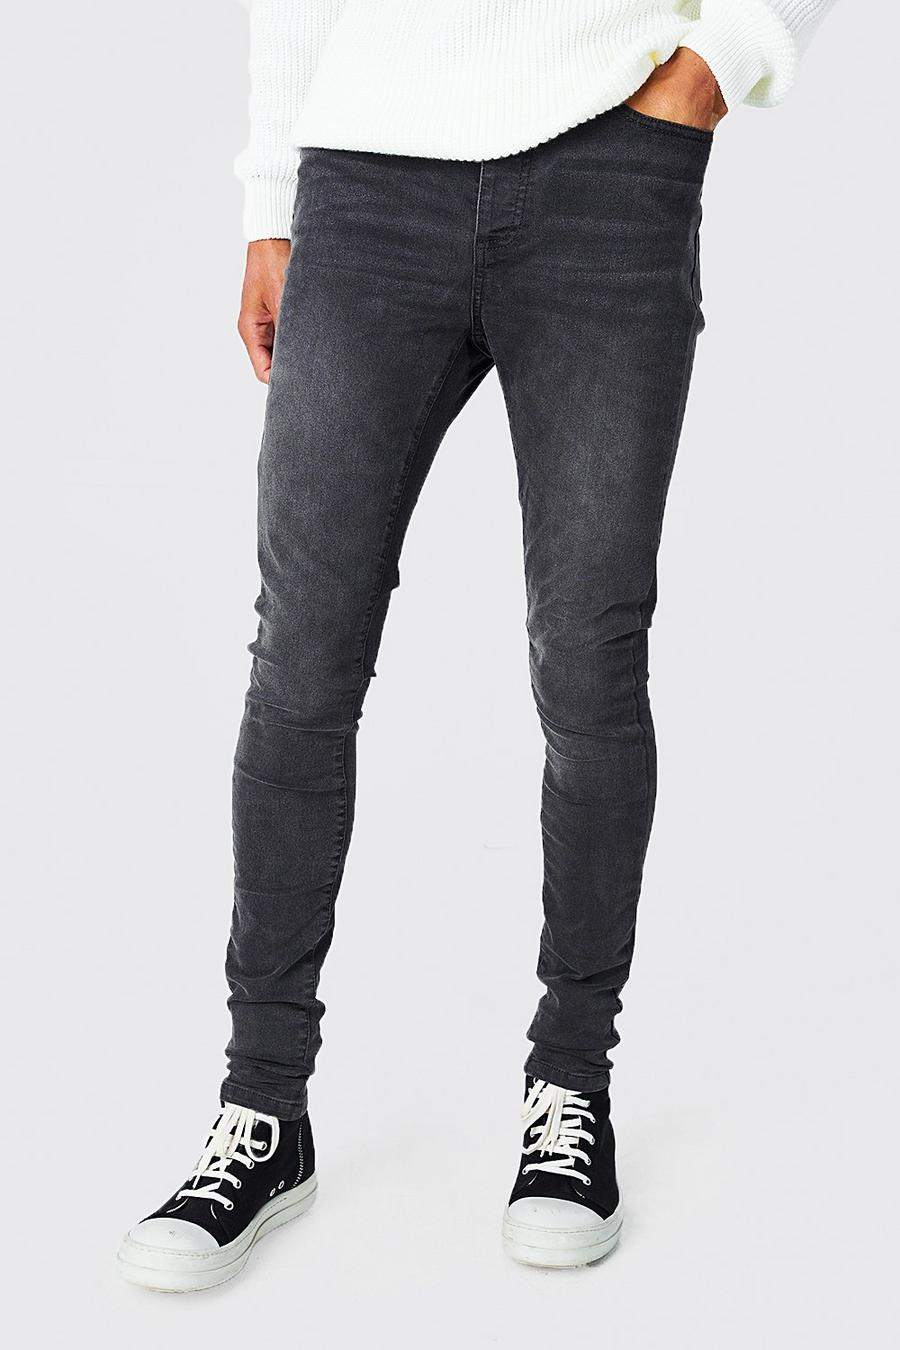 Charcoal grey Tall Skinny Stretch Jeans